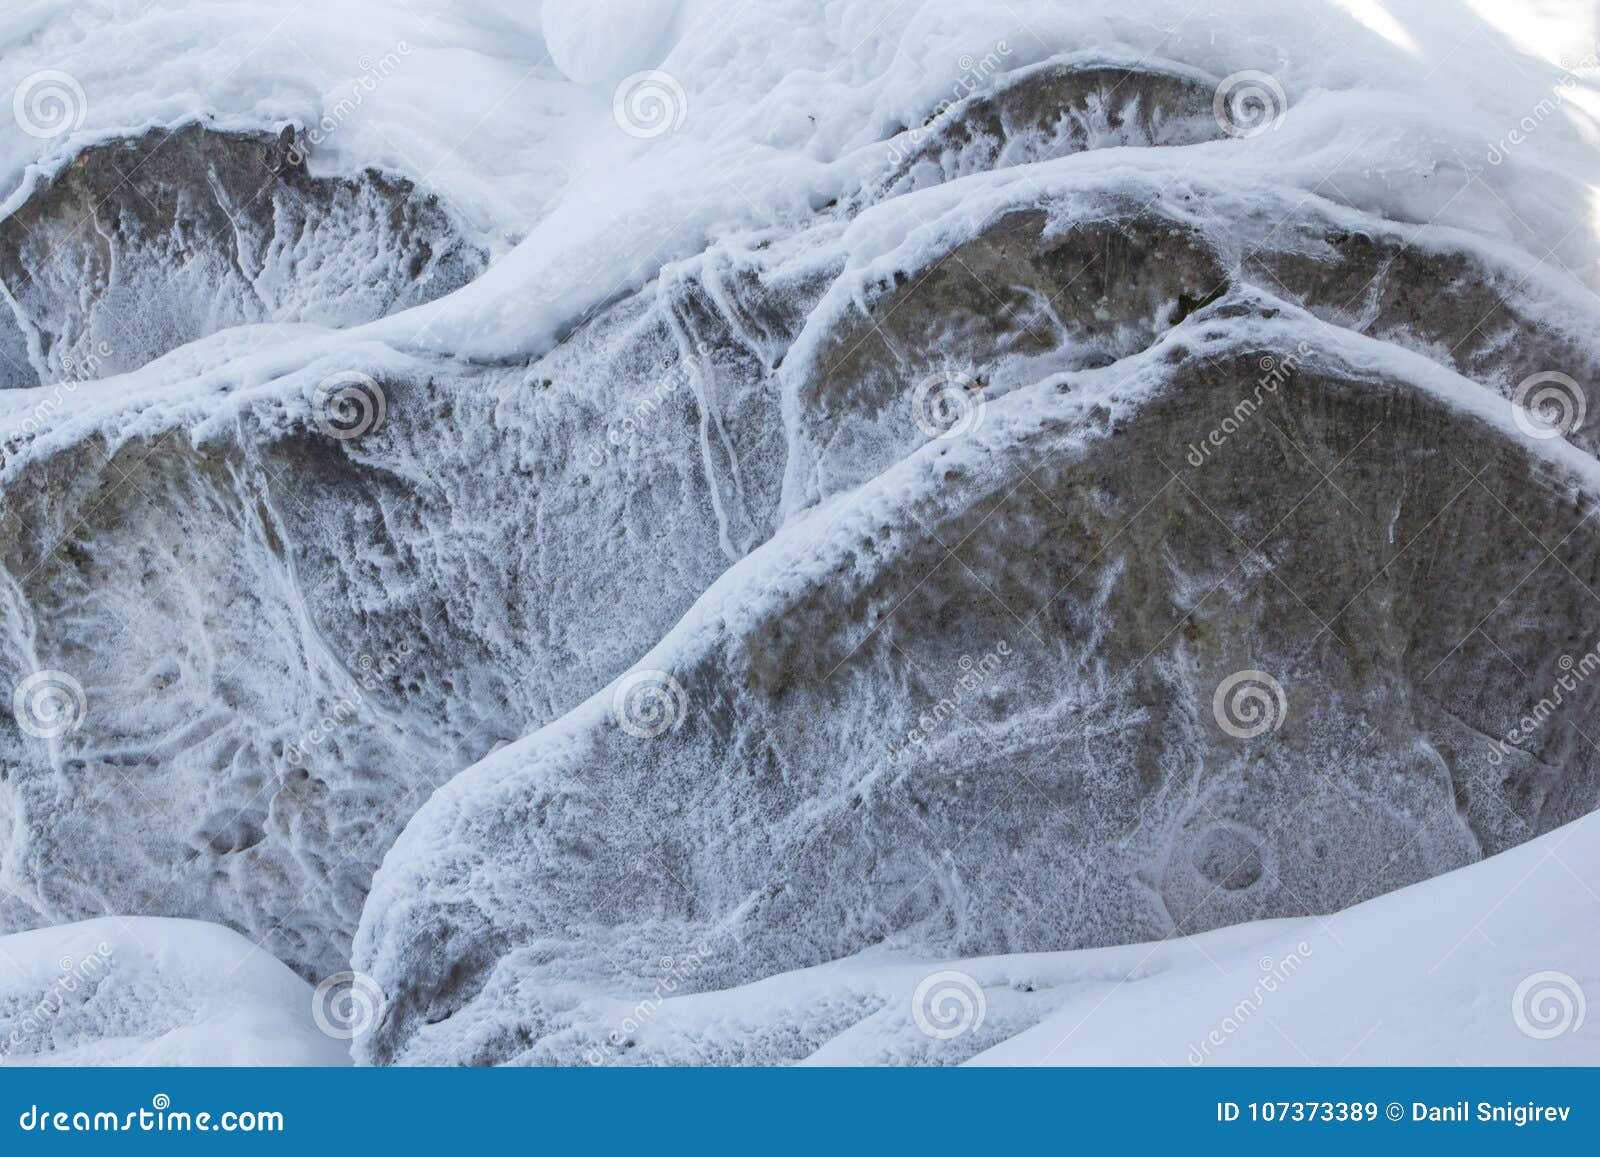 Stone Texture In Snow And Ice Mountain Wall Rock Texture Stock Image Image Of Dalmatia Hardness